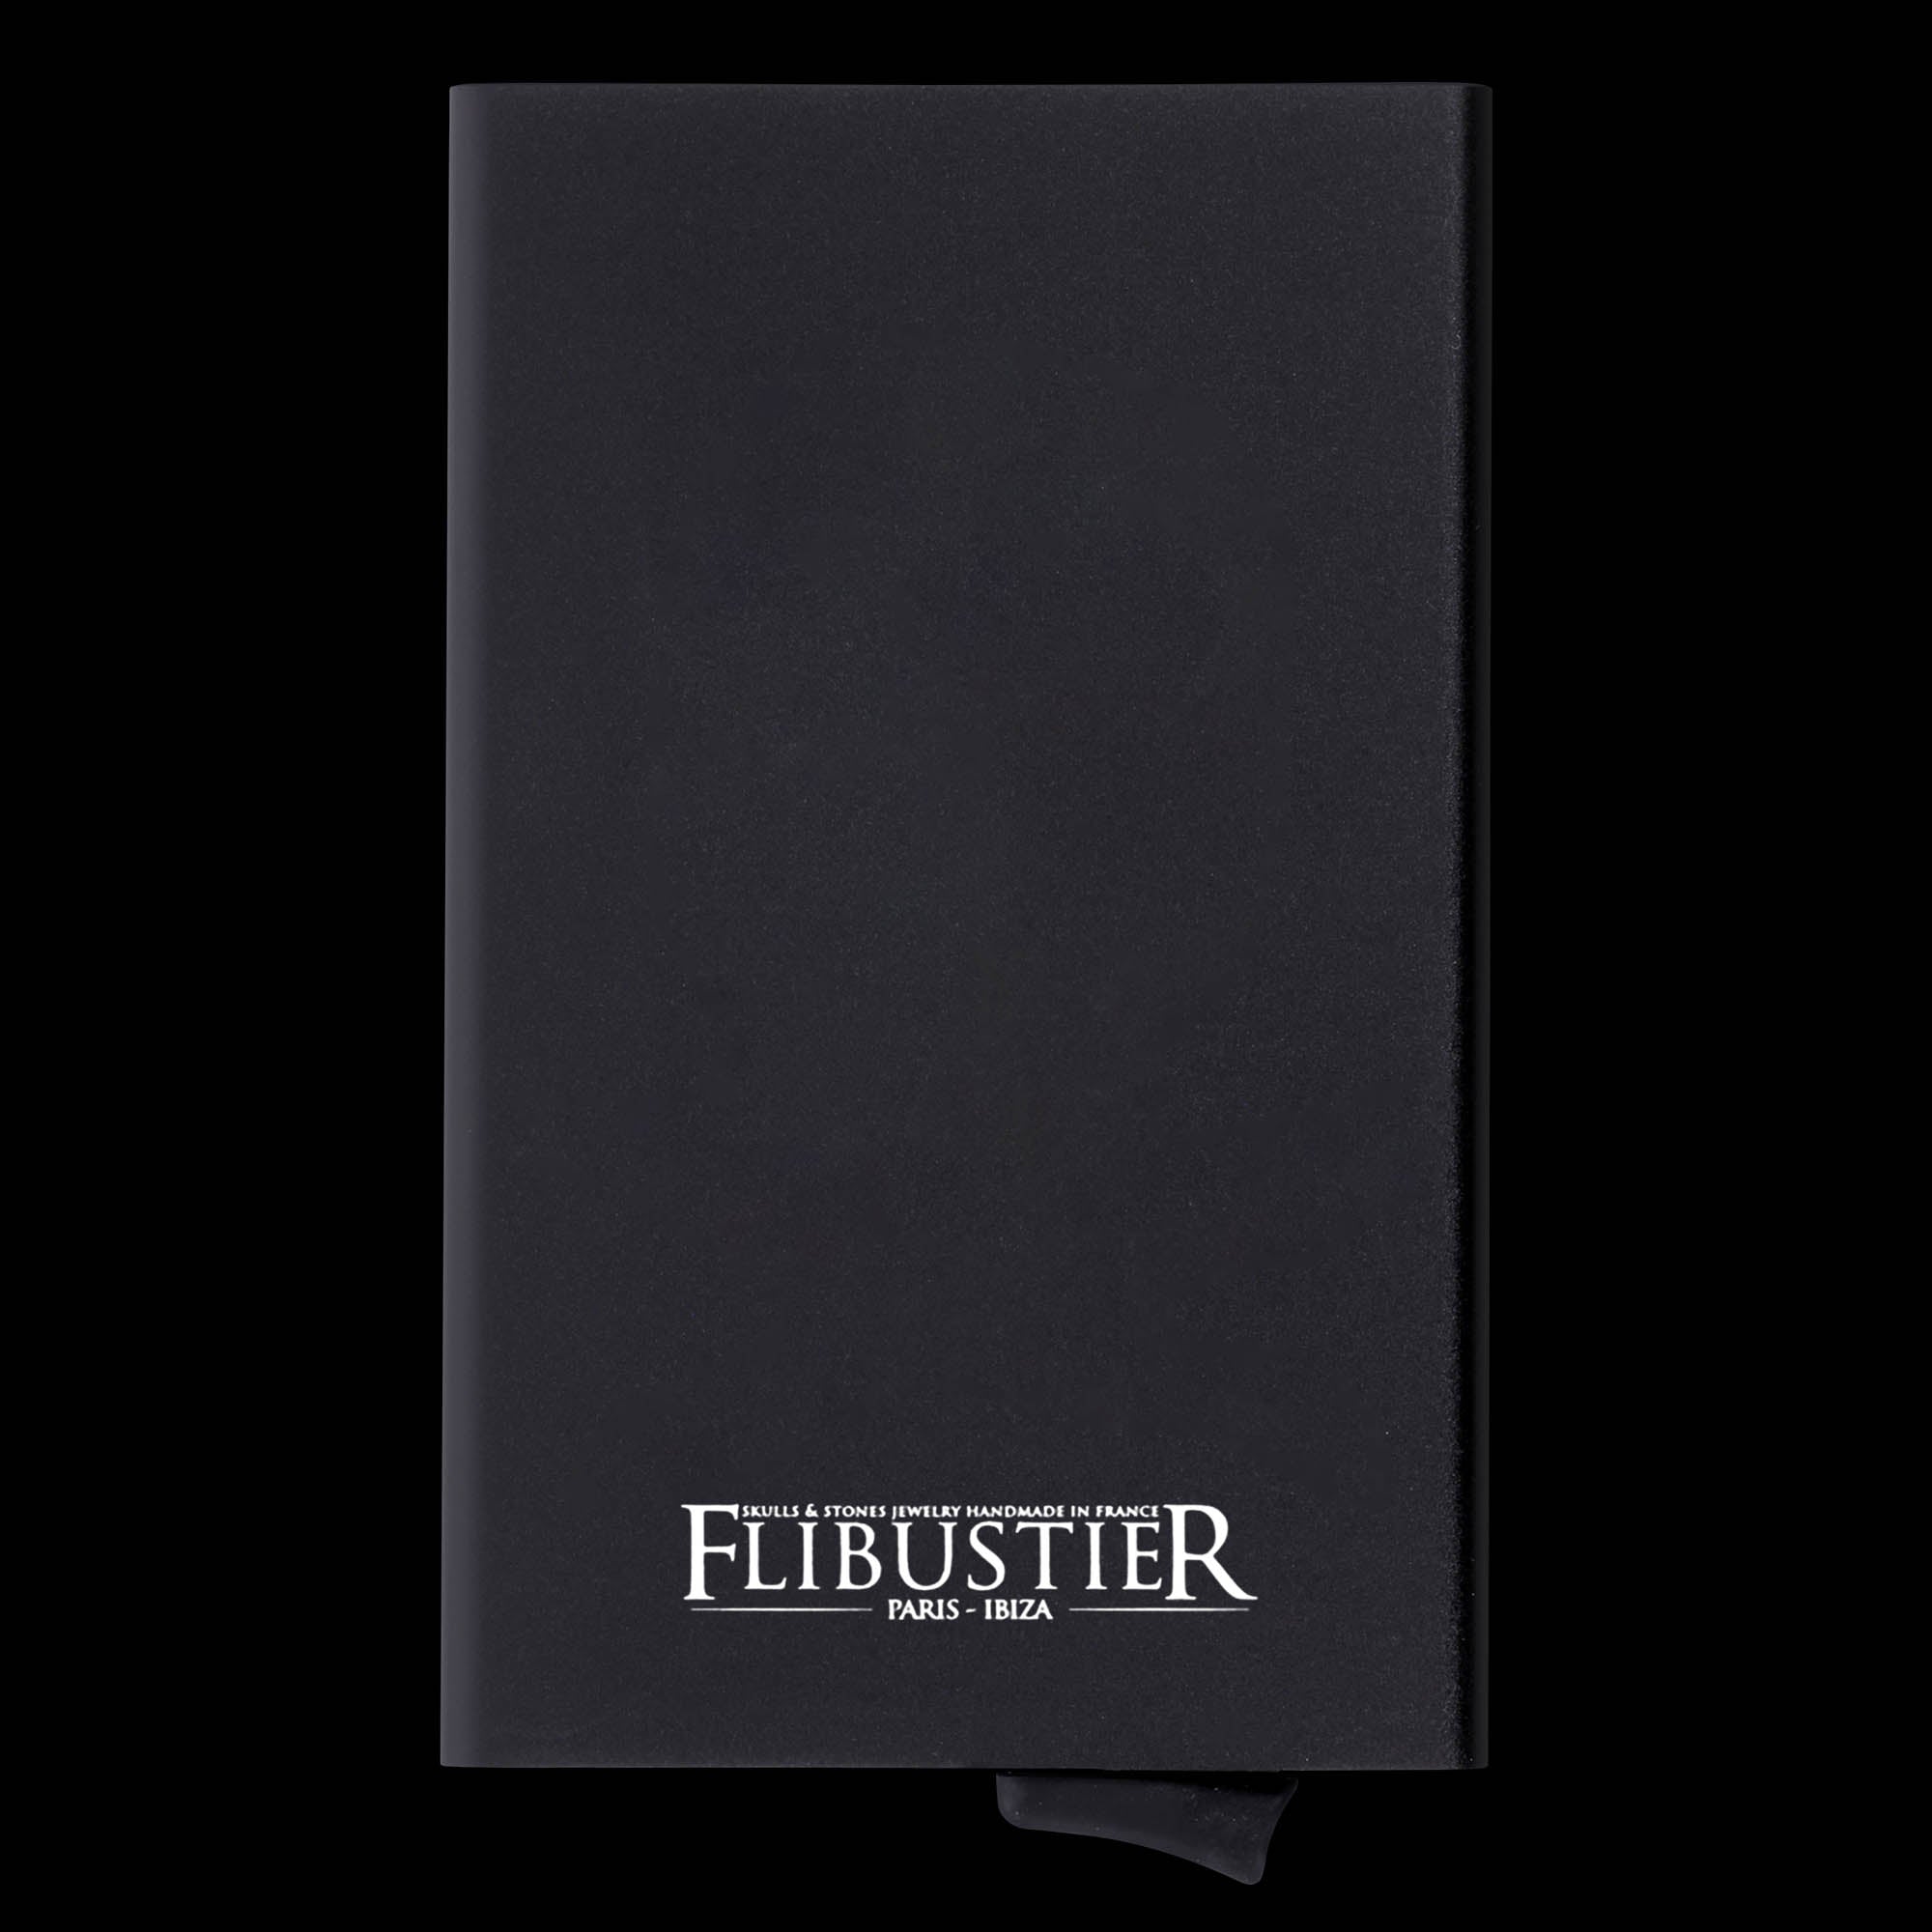 RFID secure monogramed card holder limited edition of 100 copies - Flibustier Paris